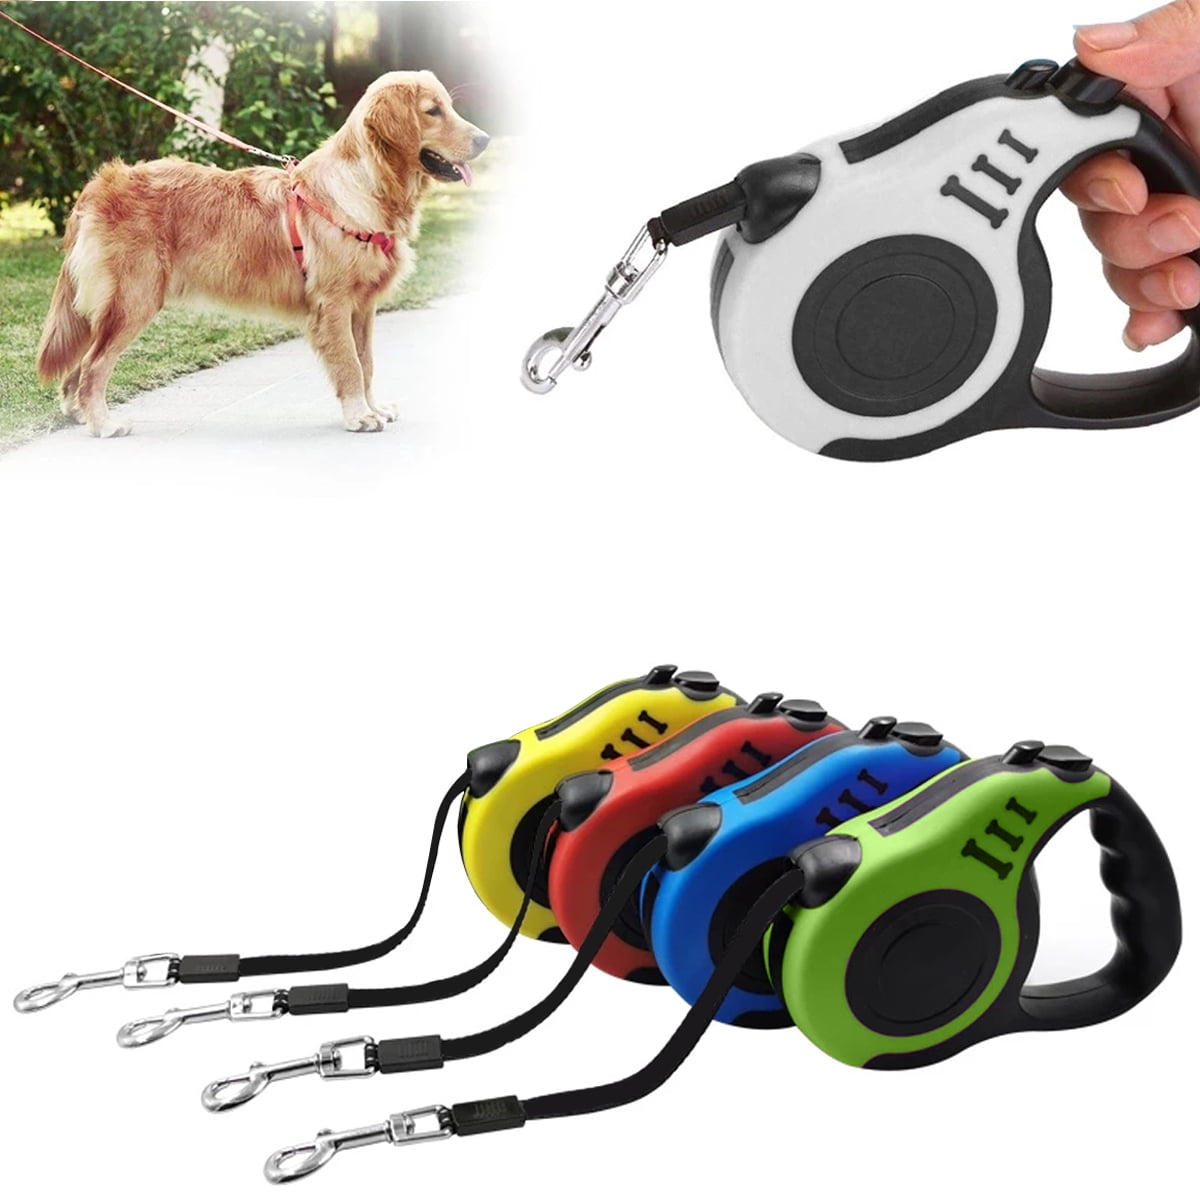 Retractable Dog Leash Leads Extendable Small Puppy Dog Pet Auto Leads 3m/5m Long 